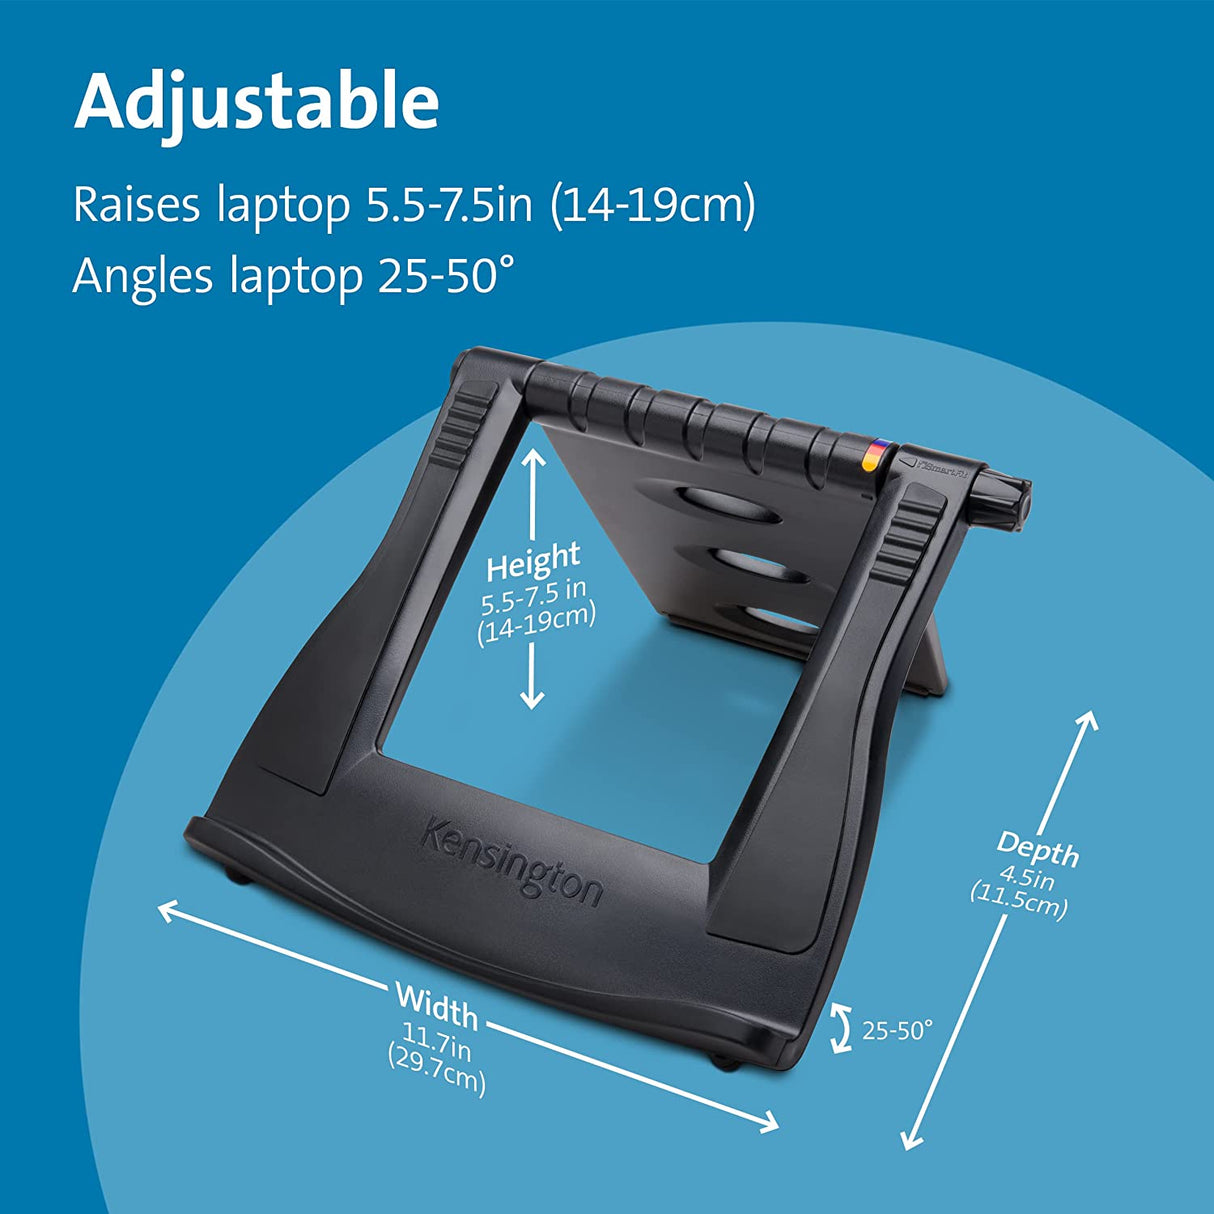 Kensington SmartFit Easy Riser Laptop and Tablet Cooling Stand - Fits Wacom, iPad Pro and Other Tablets and laptops - Black (K52788WW), 12.8" x 11" x 1.6"